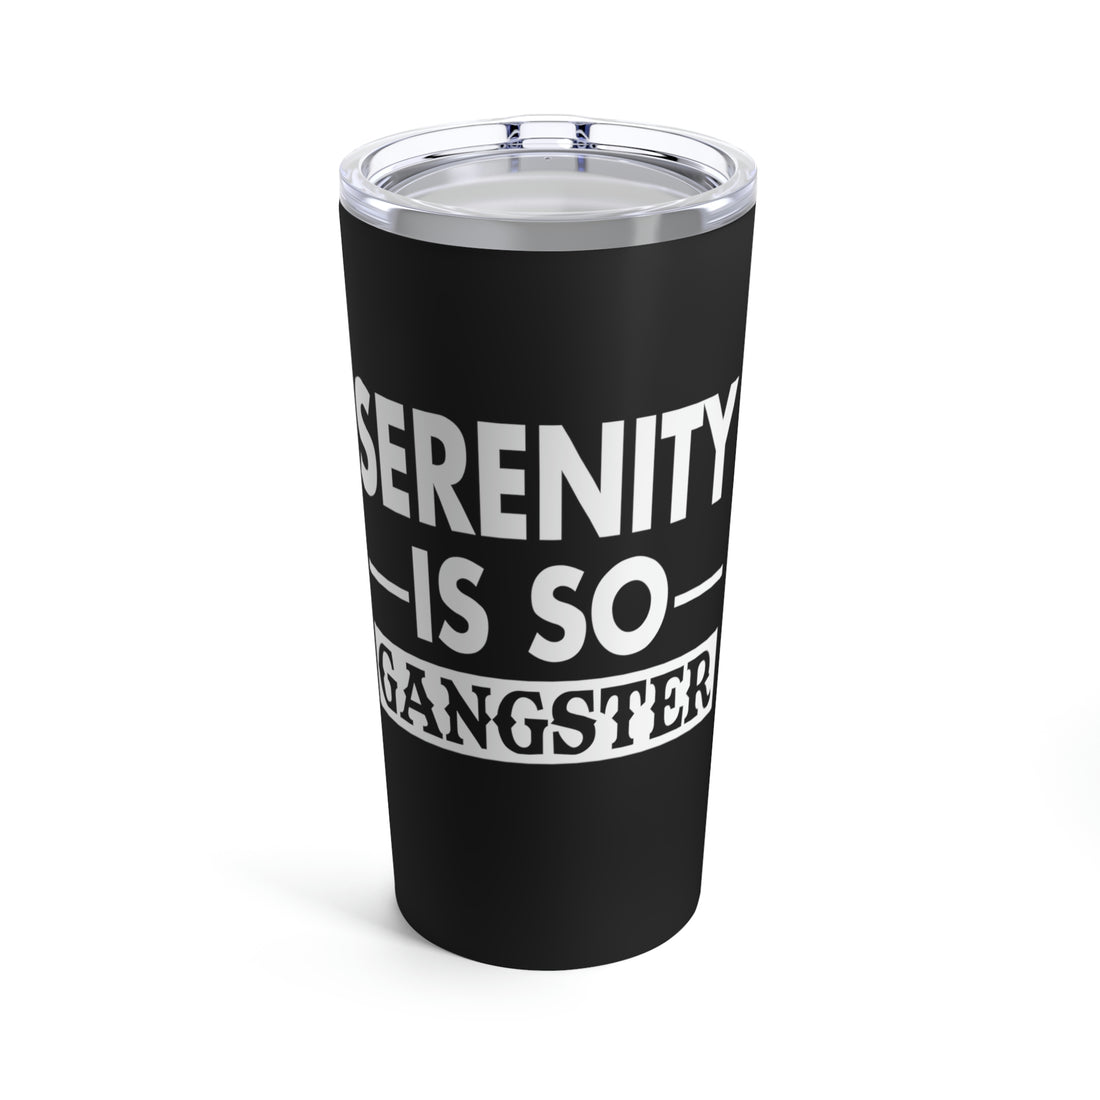 Serenity Is So Gangster - Tumbler 20oz